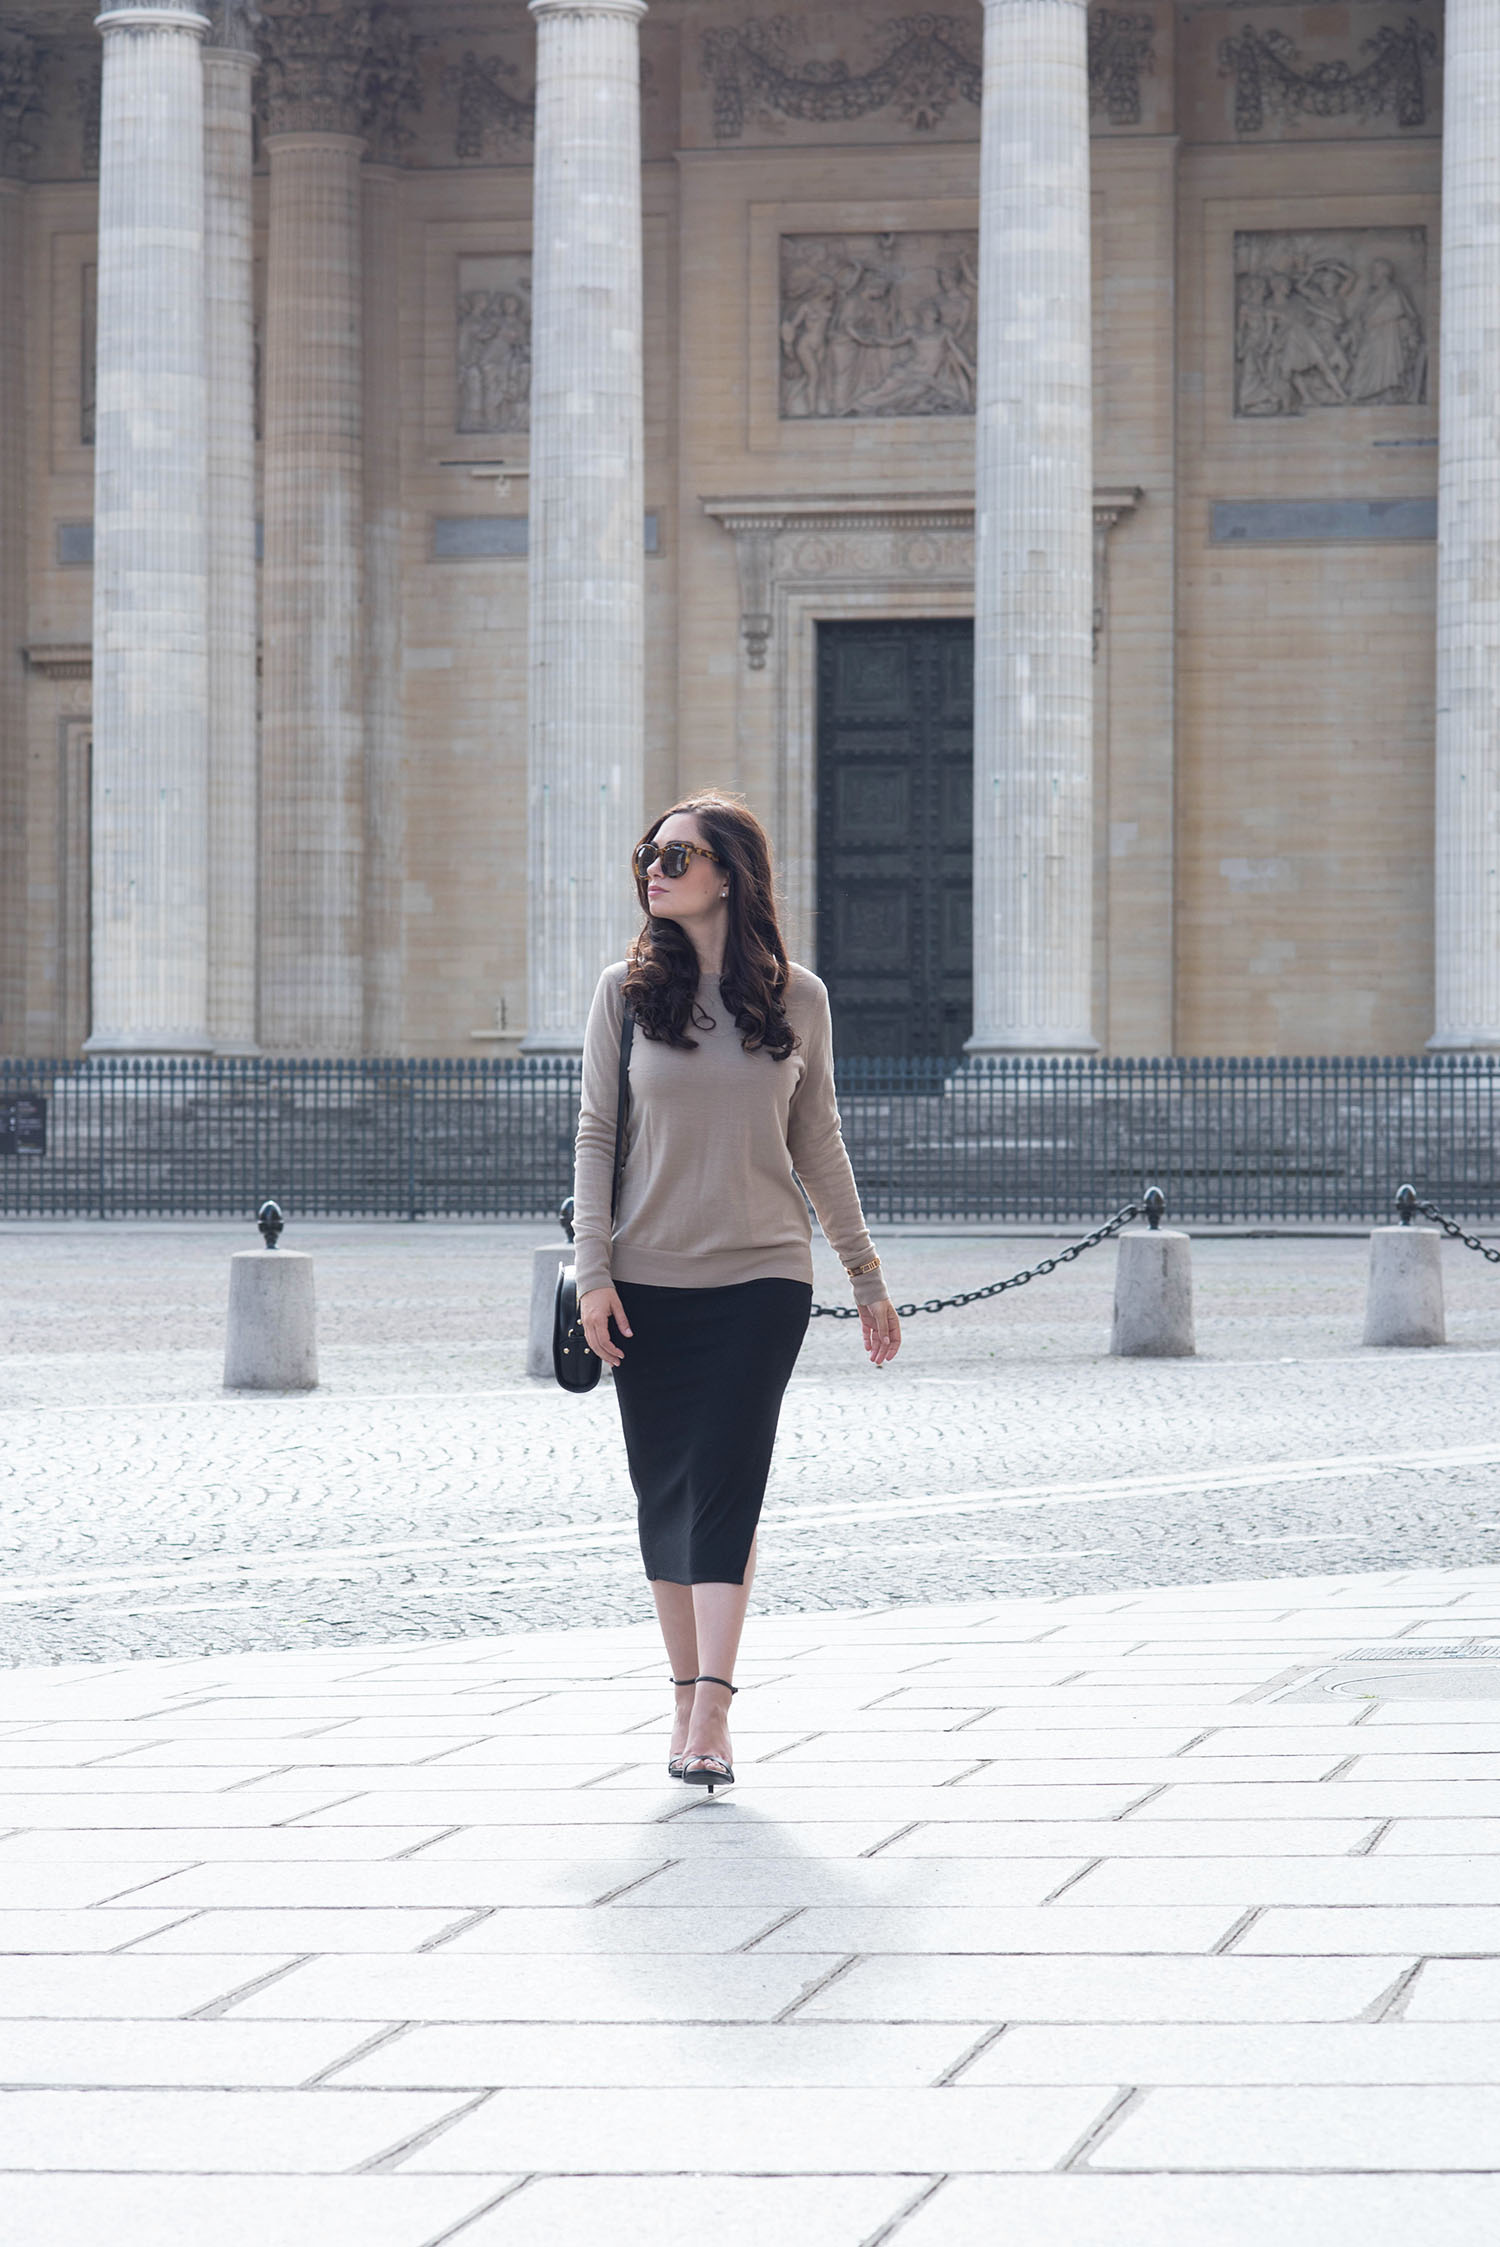 Canadian fashion blogger Cee Fardoe of Coco & Vera walks in front of the Pantheon in Paris wearing a Uniqlo camel sweater and Steve Madden Stecy sandals